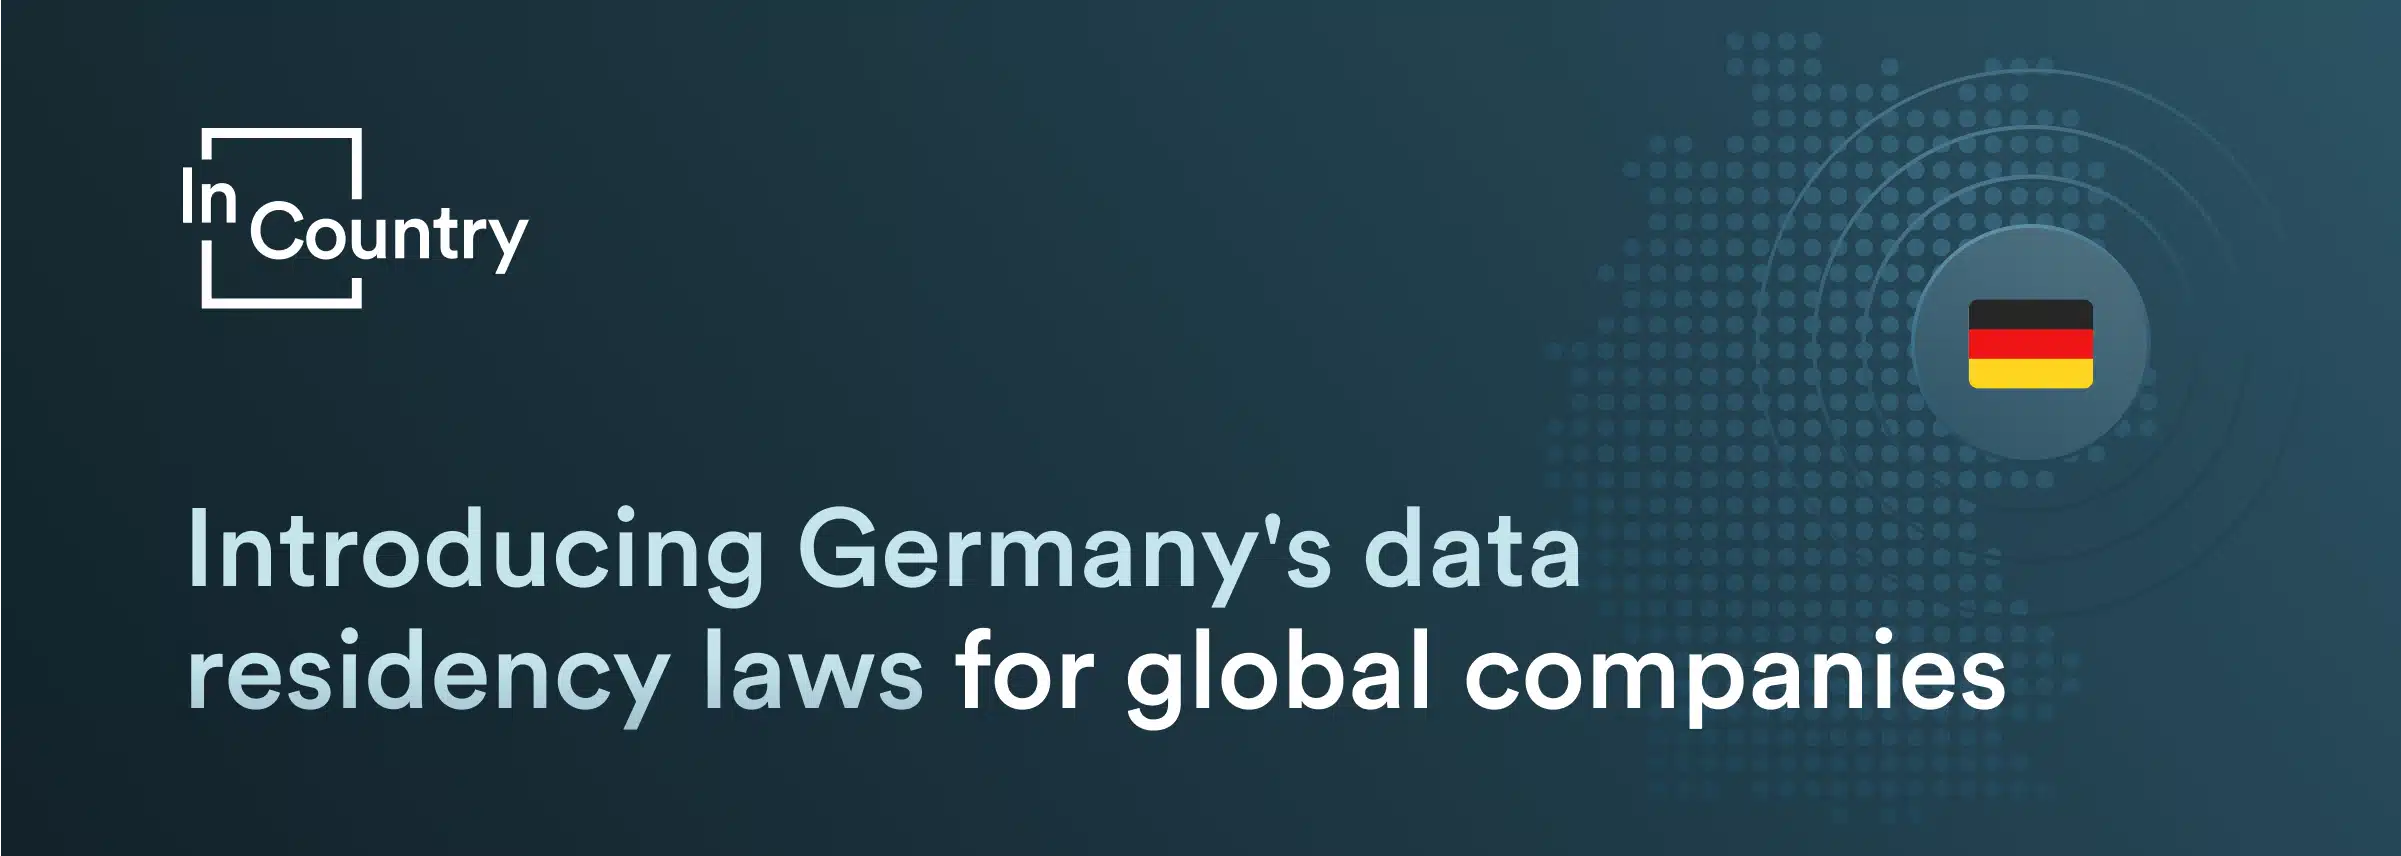 Introducing Germany's data residency laws for global companies